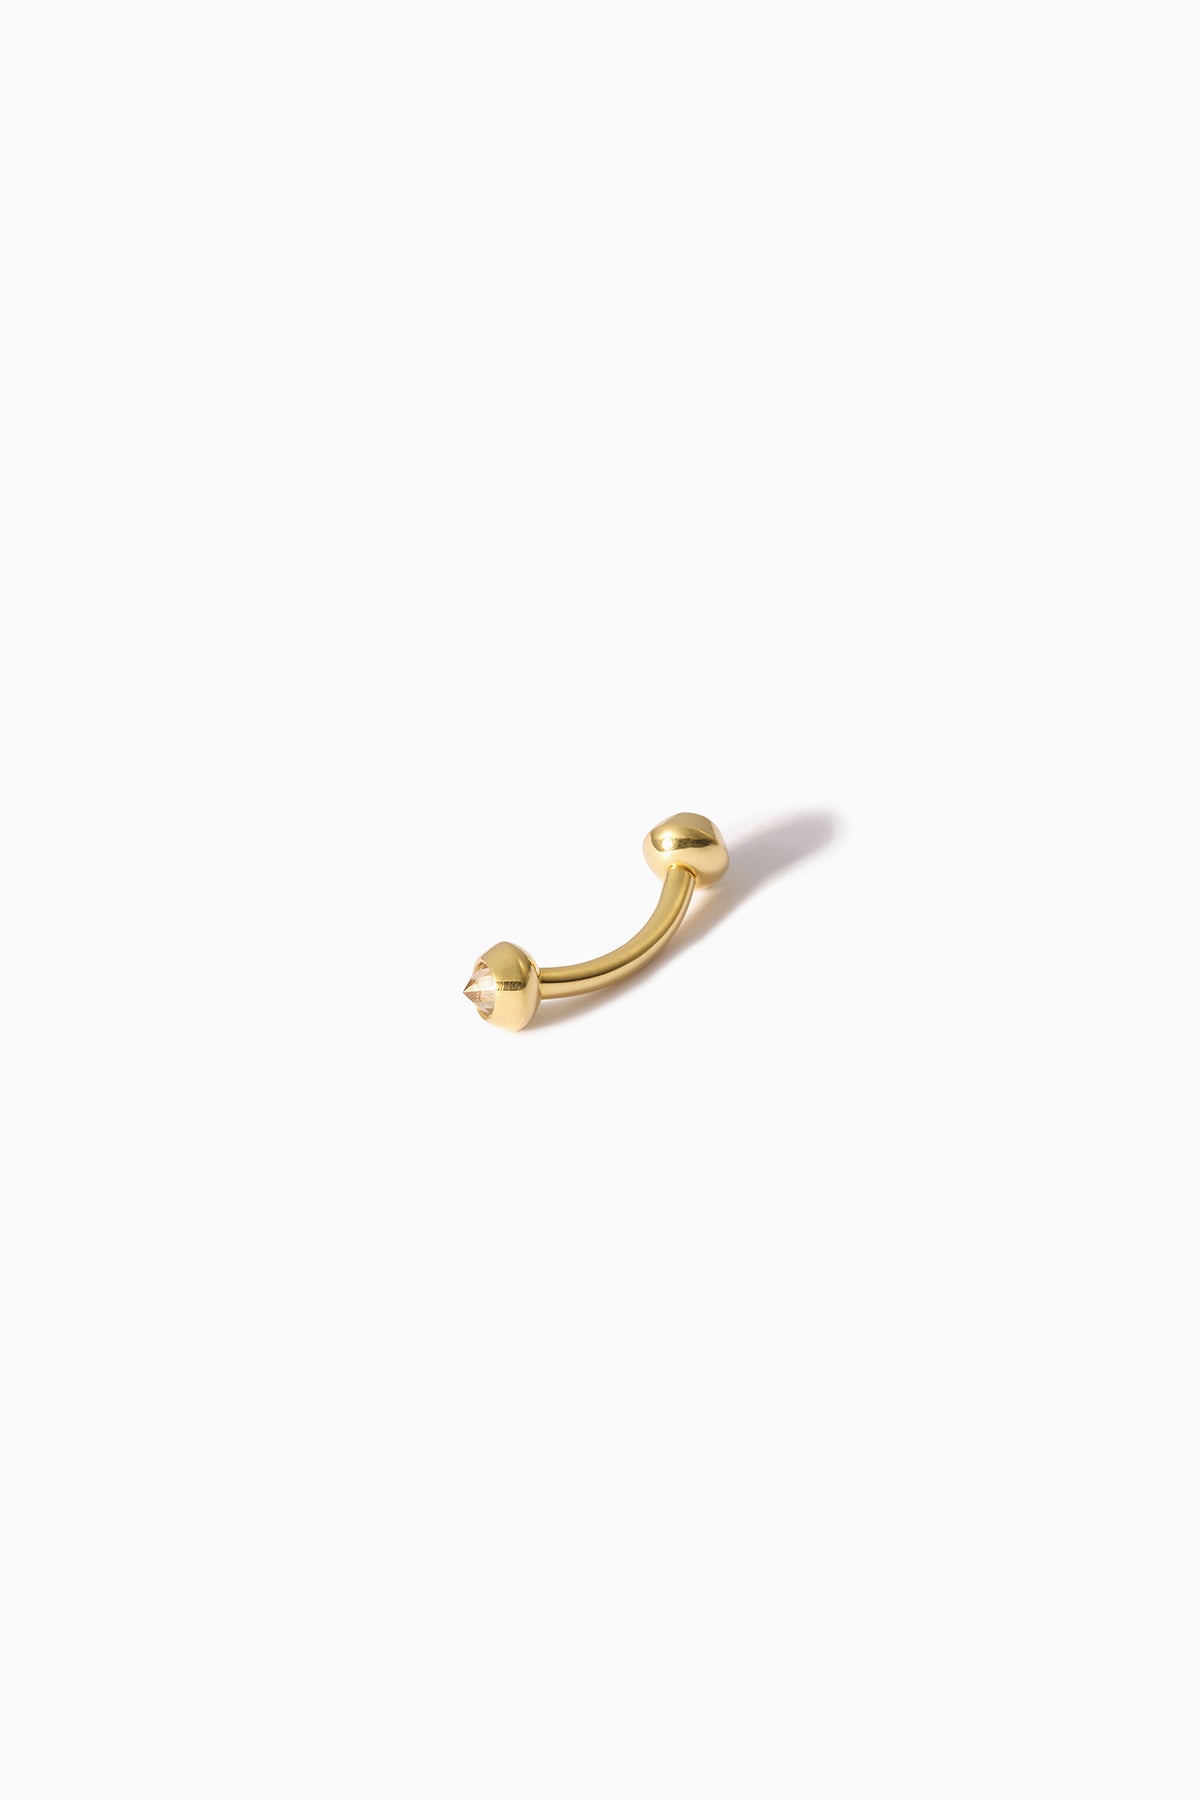 HANNAH MARTIN | 18K YELLOW GOLD STUD DIAMOND CURVED BARBELL EARRING CHAMPAGNE